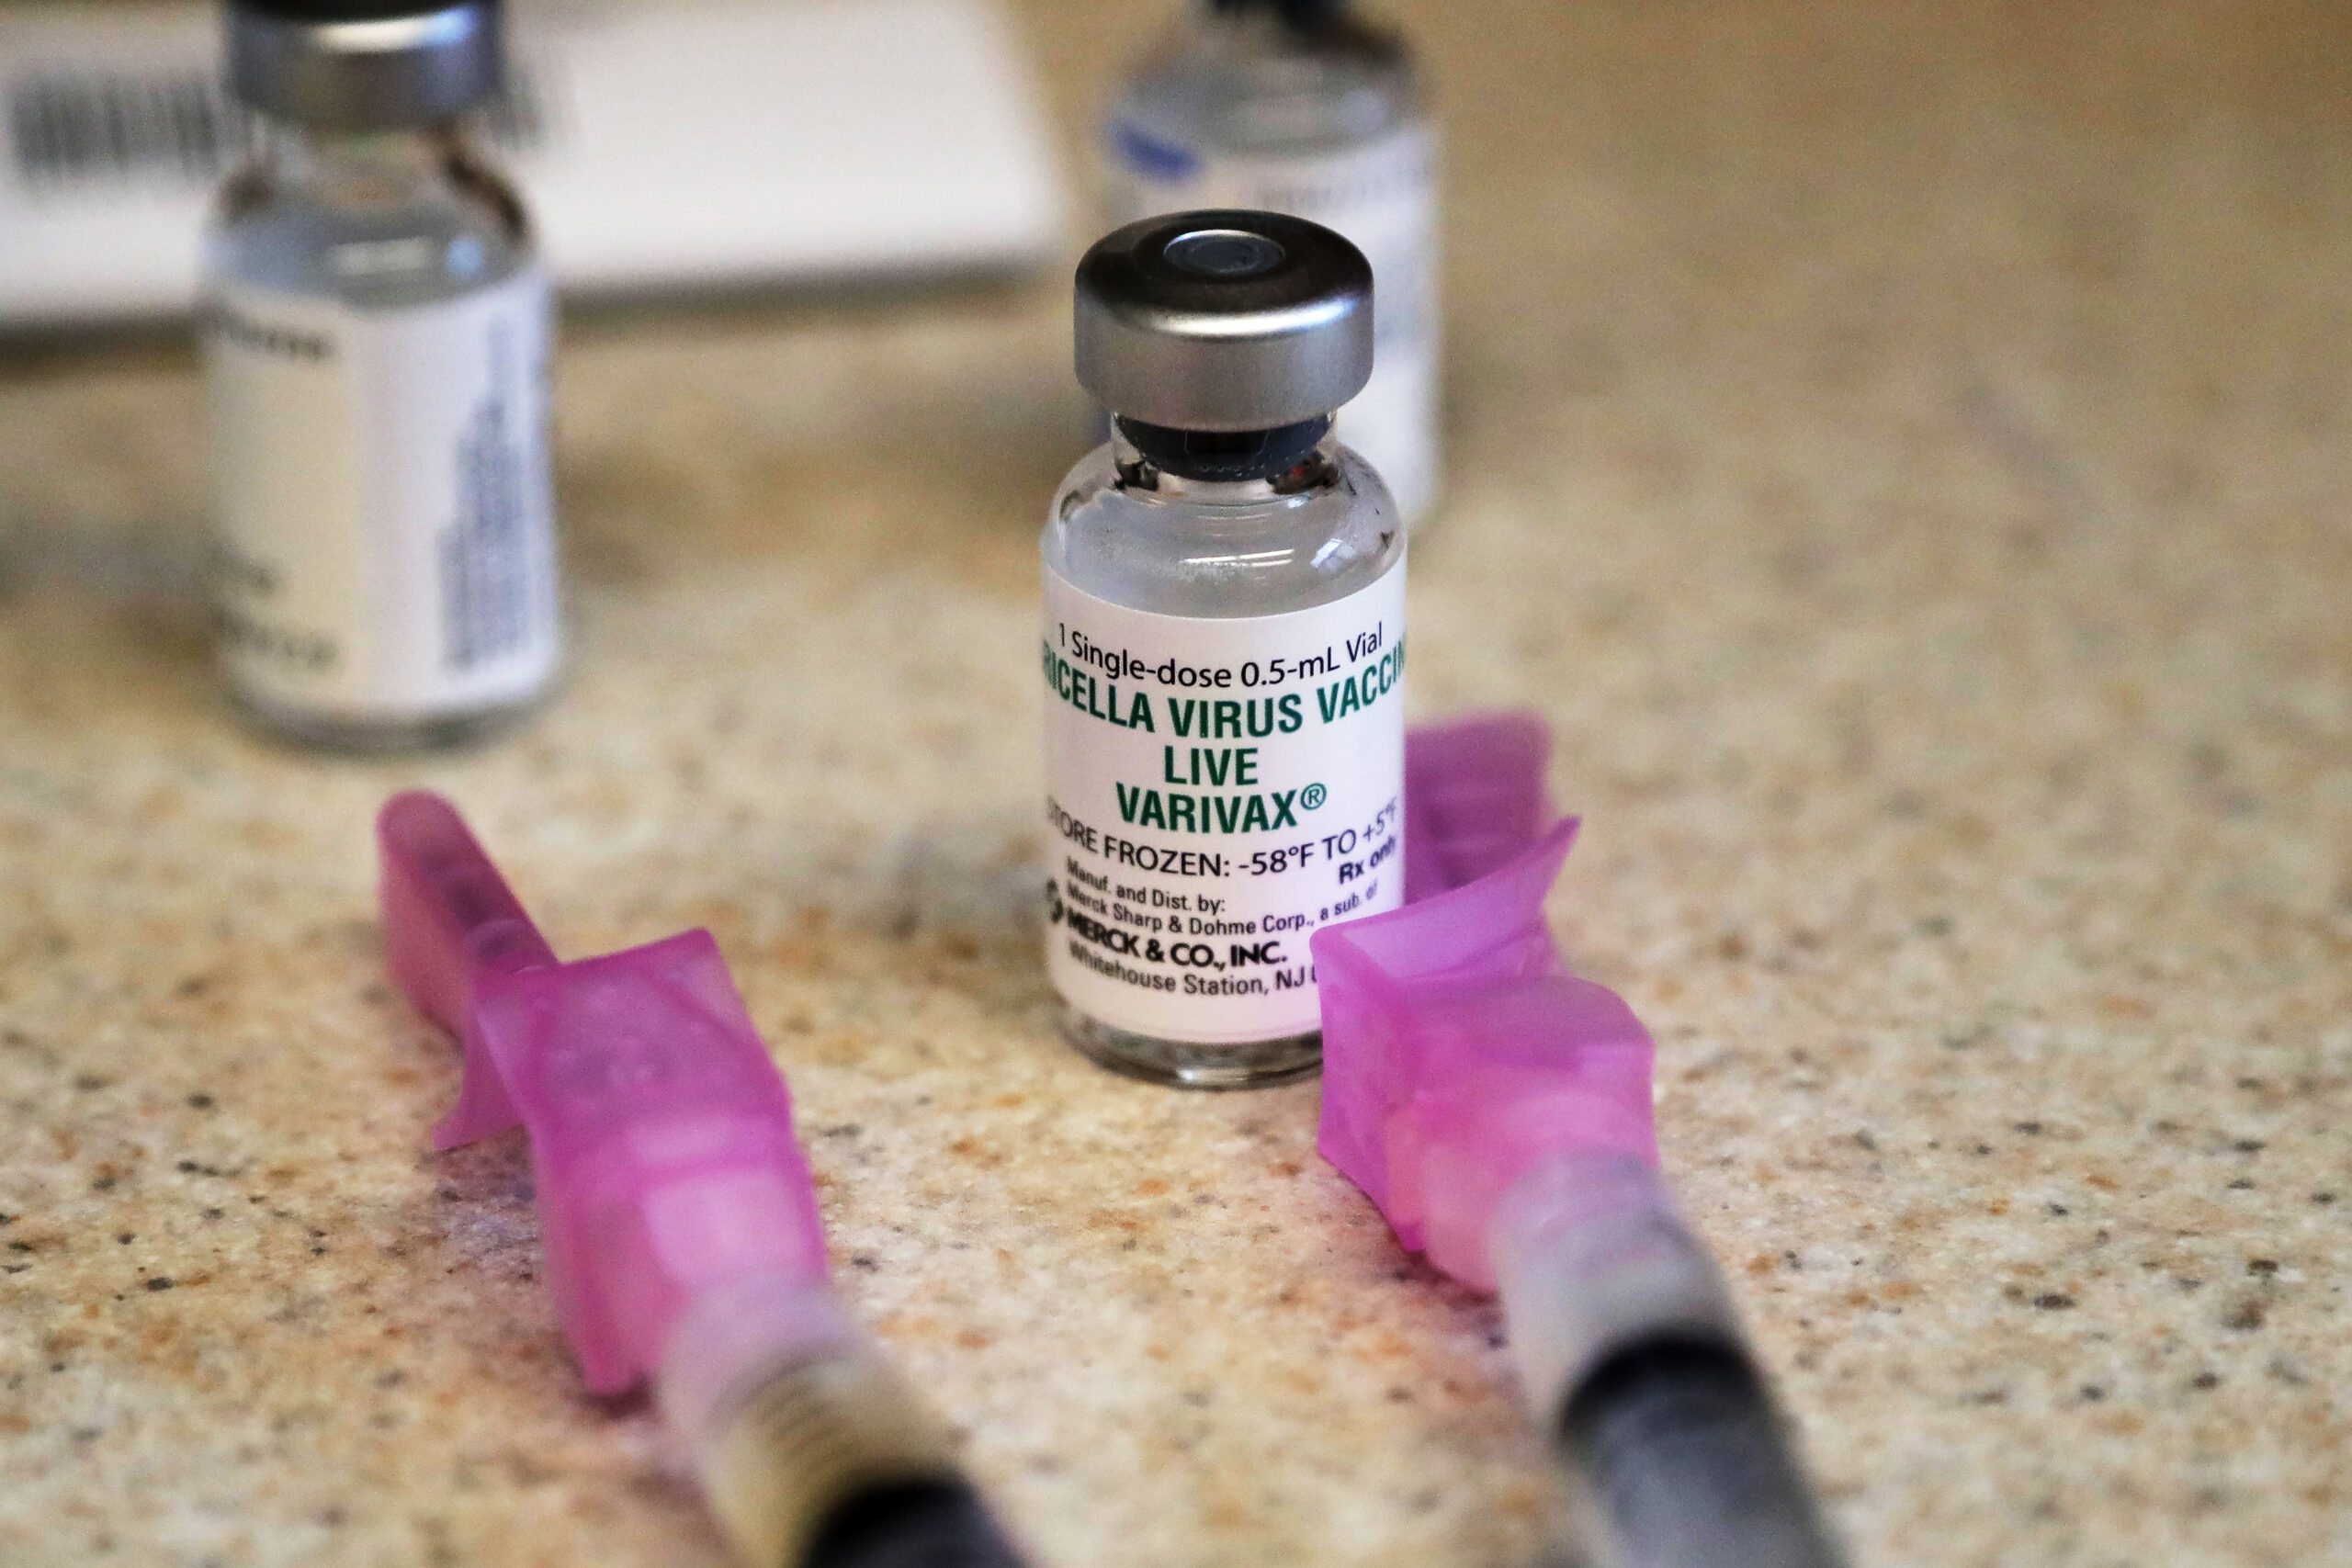 A chickenpox vaccine sits next to syringes